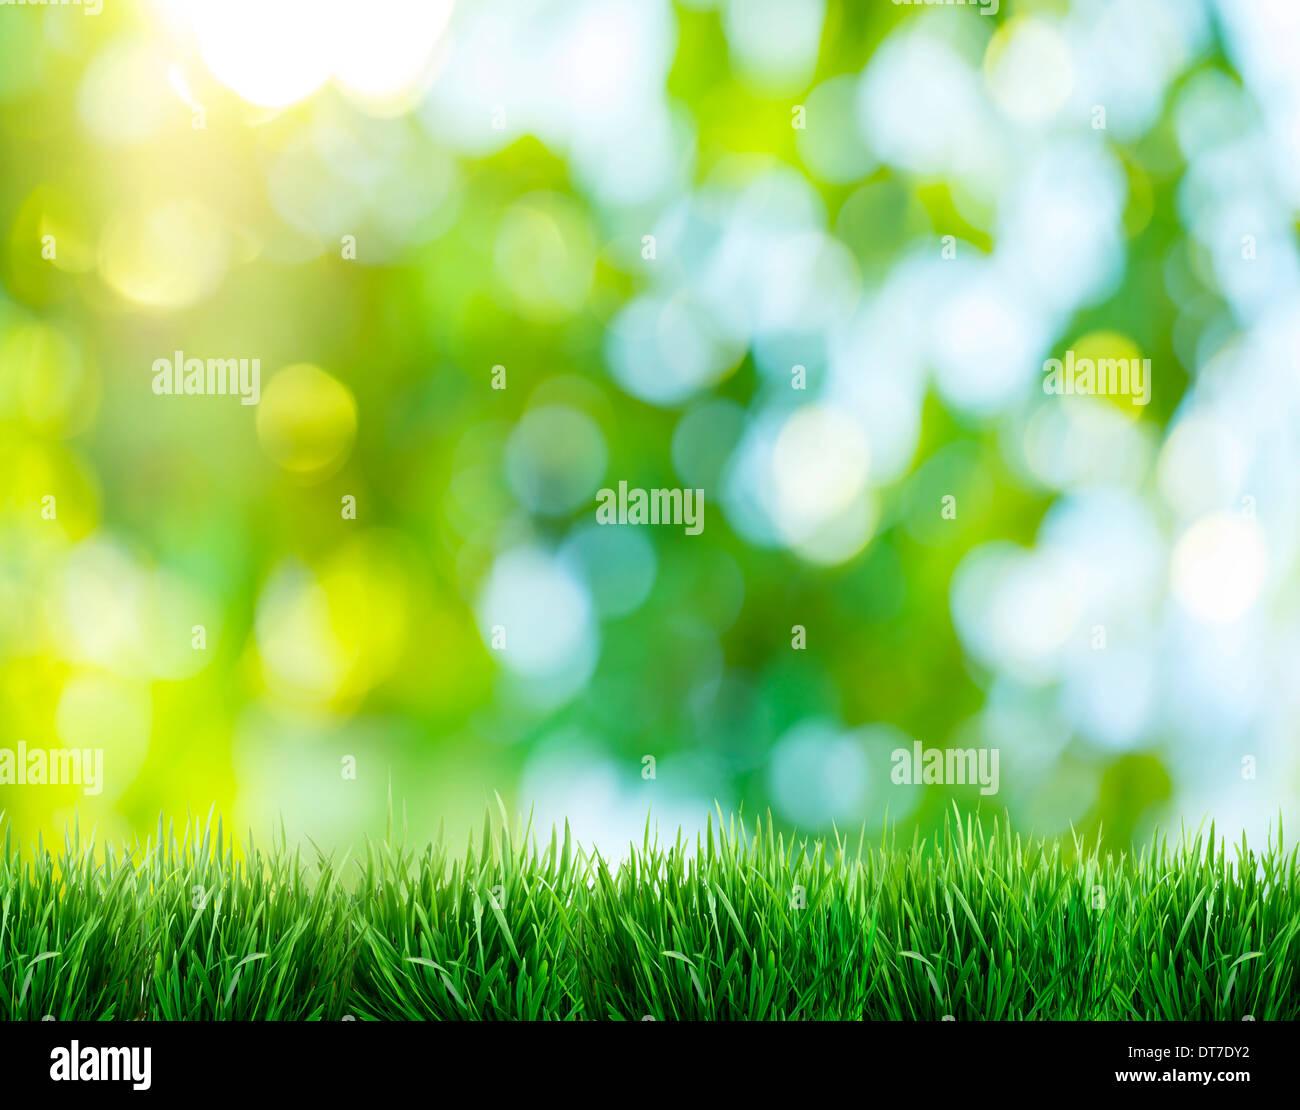 Blurred nature background. In foreground the green grass. Stock Photo